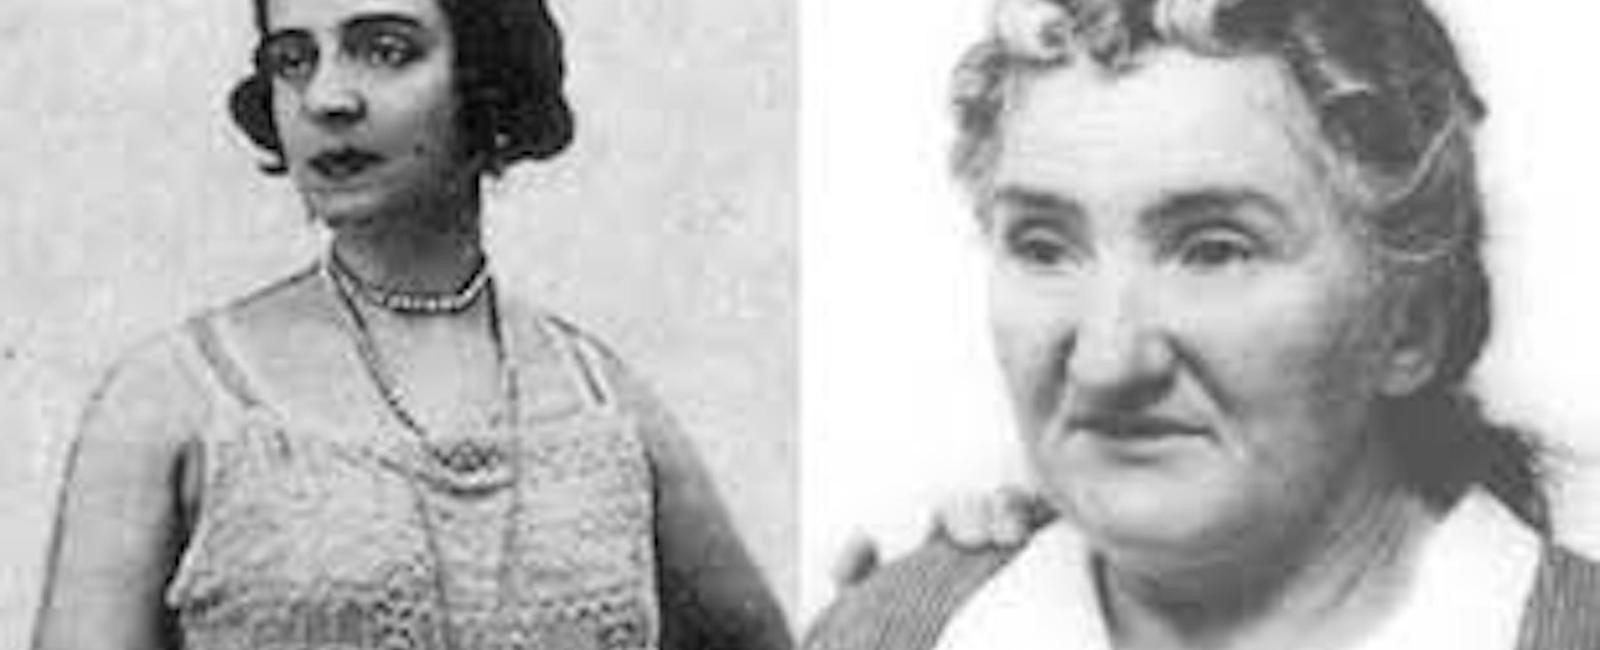 Leonarda cianciulli was a notorious italian serial killer who made candy and soap out of her victims